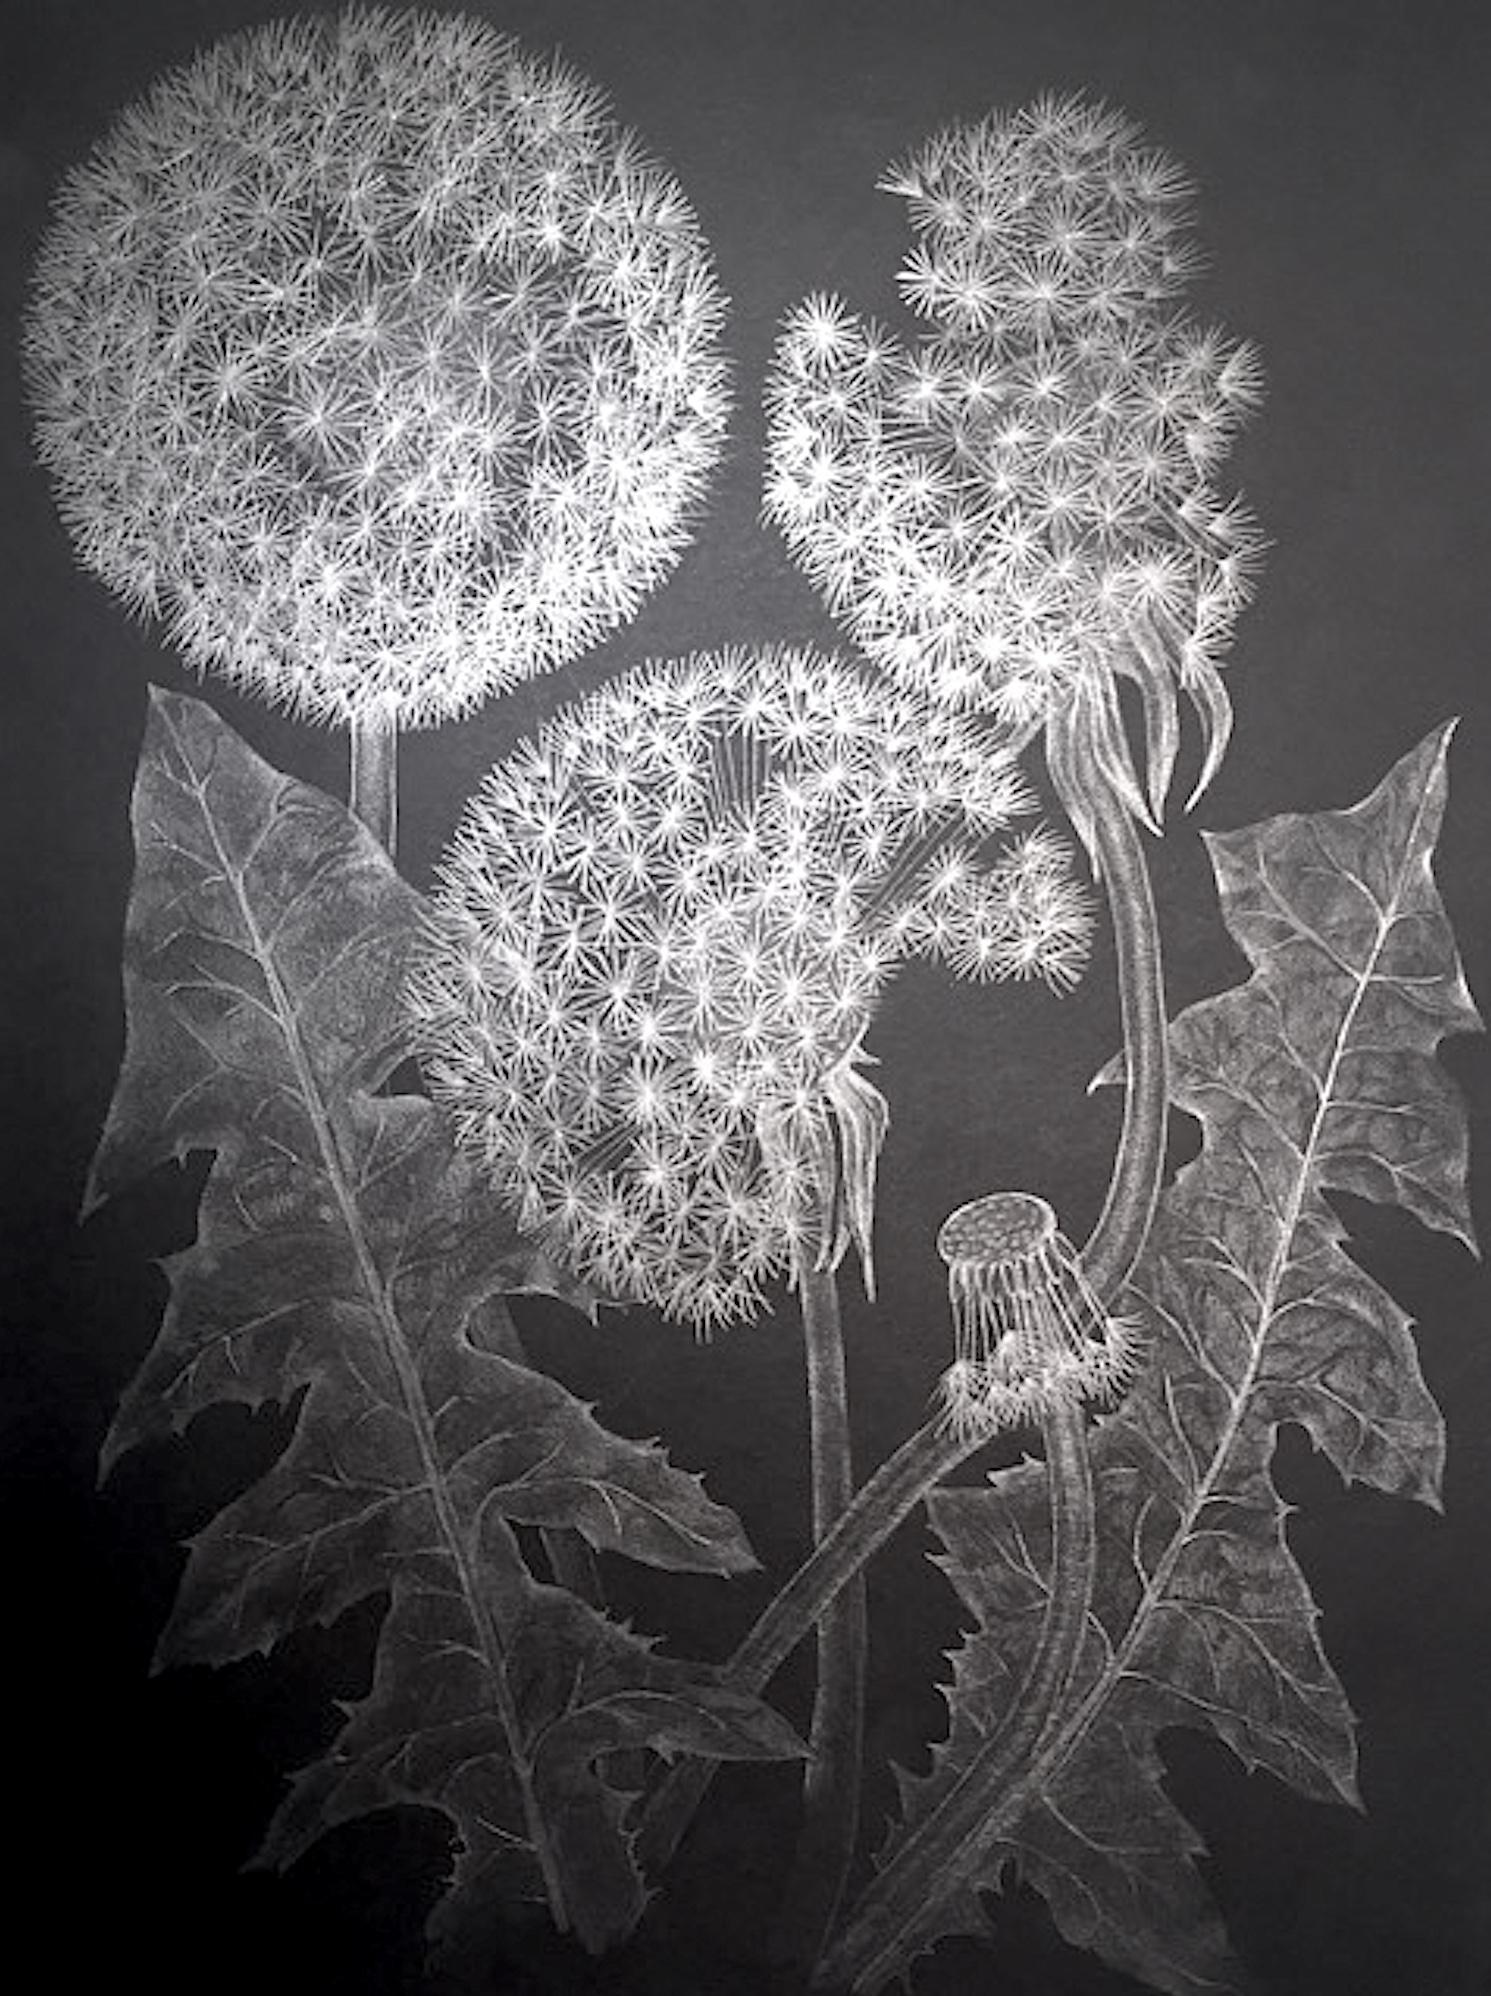 Margot Glass Landscape Art - Three Dandelions with Bud, Small Framed Silver Botanical Drawing on Black Paper